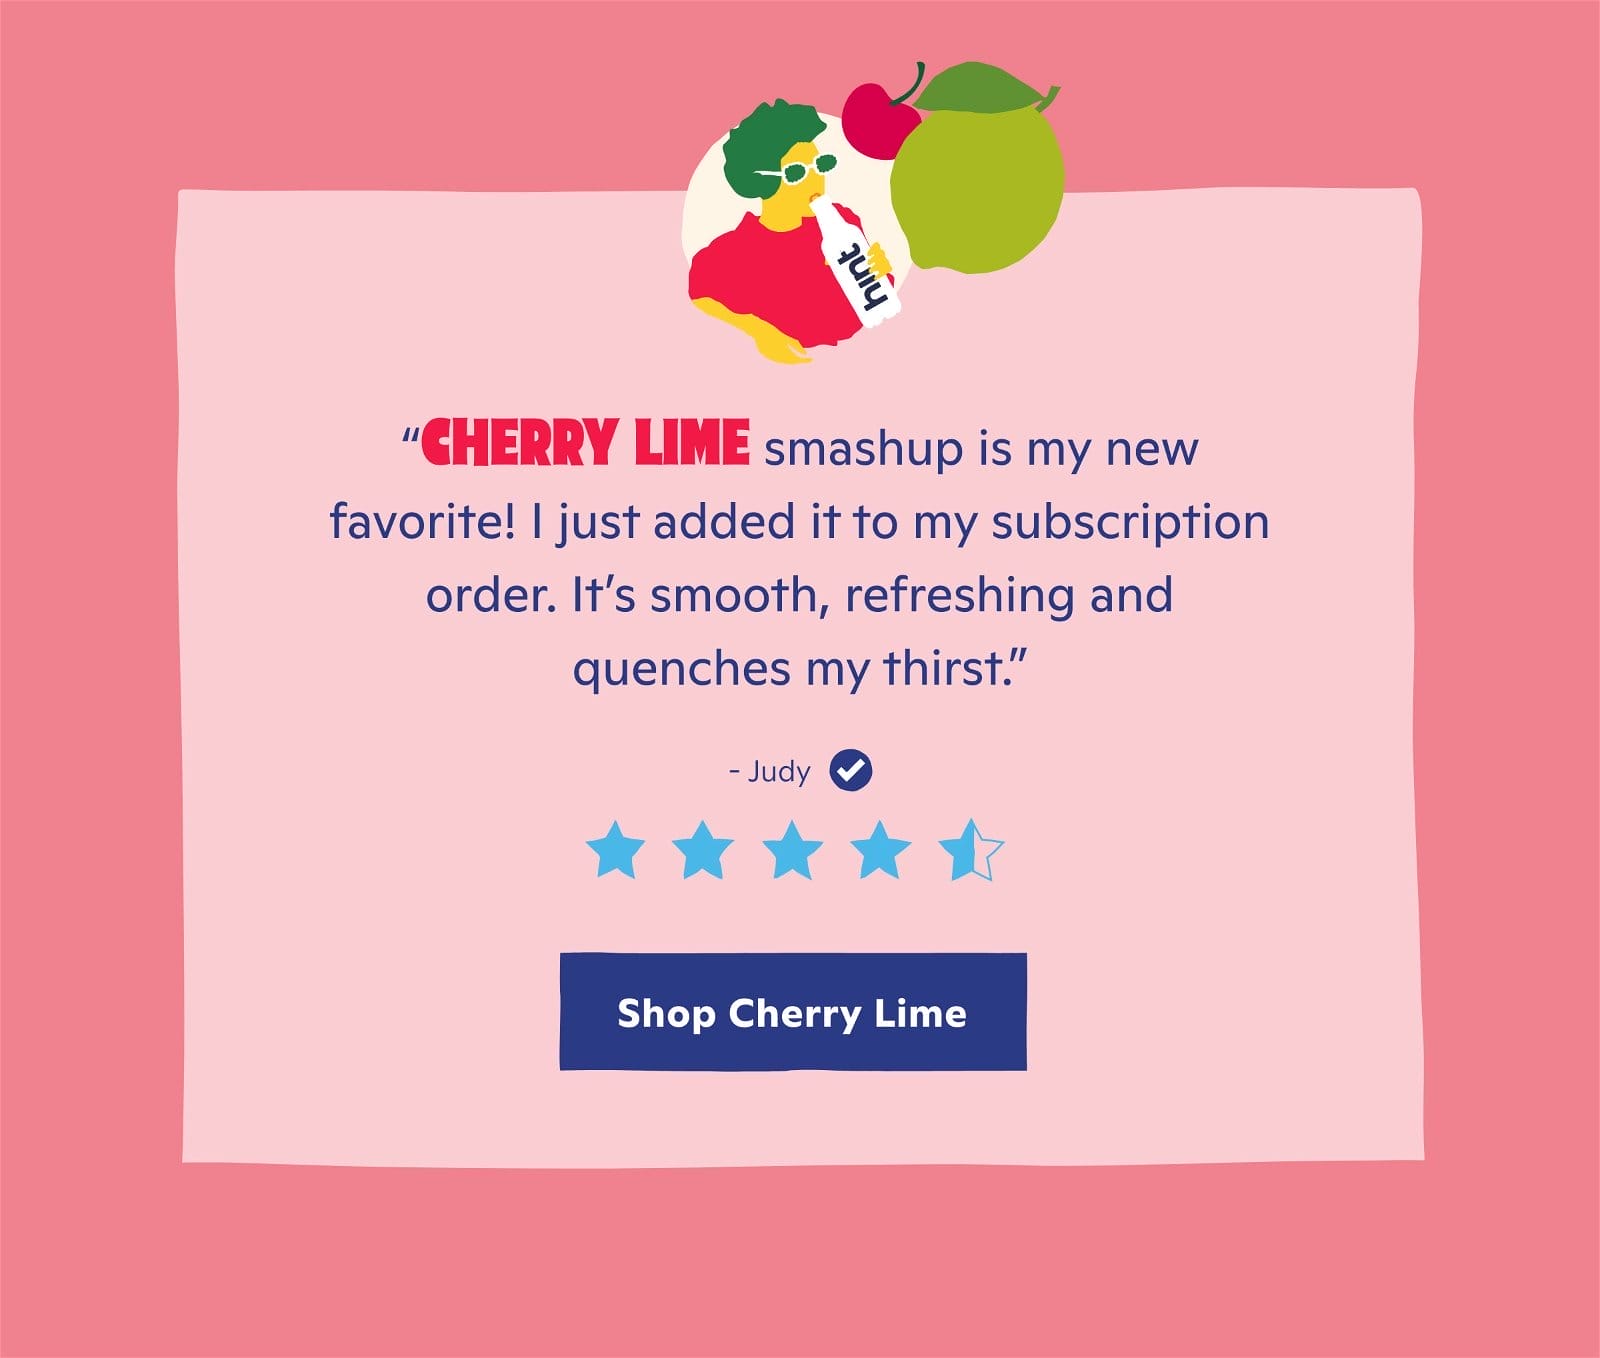 Cherry Lime Smashup is my new favorite! I just added it to my subscription order. It's smooth, refreshing and quenches my thirst."